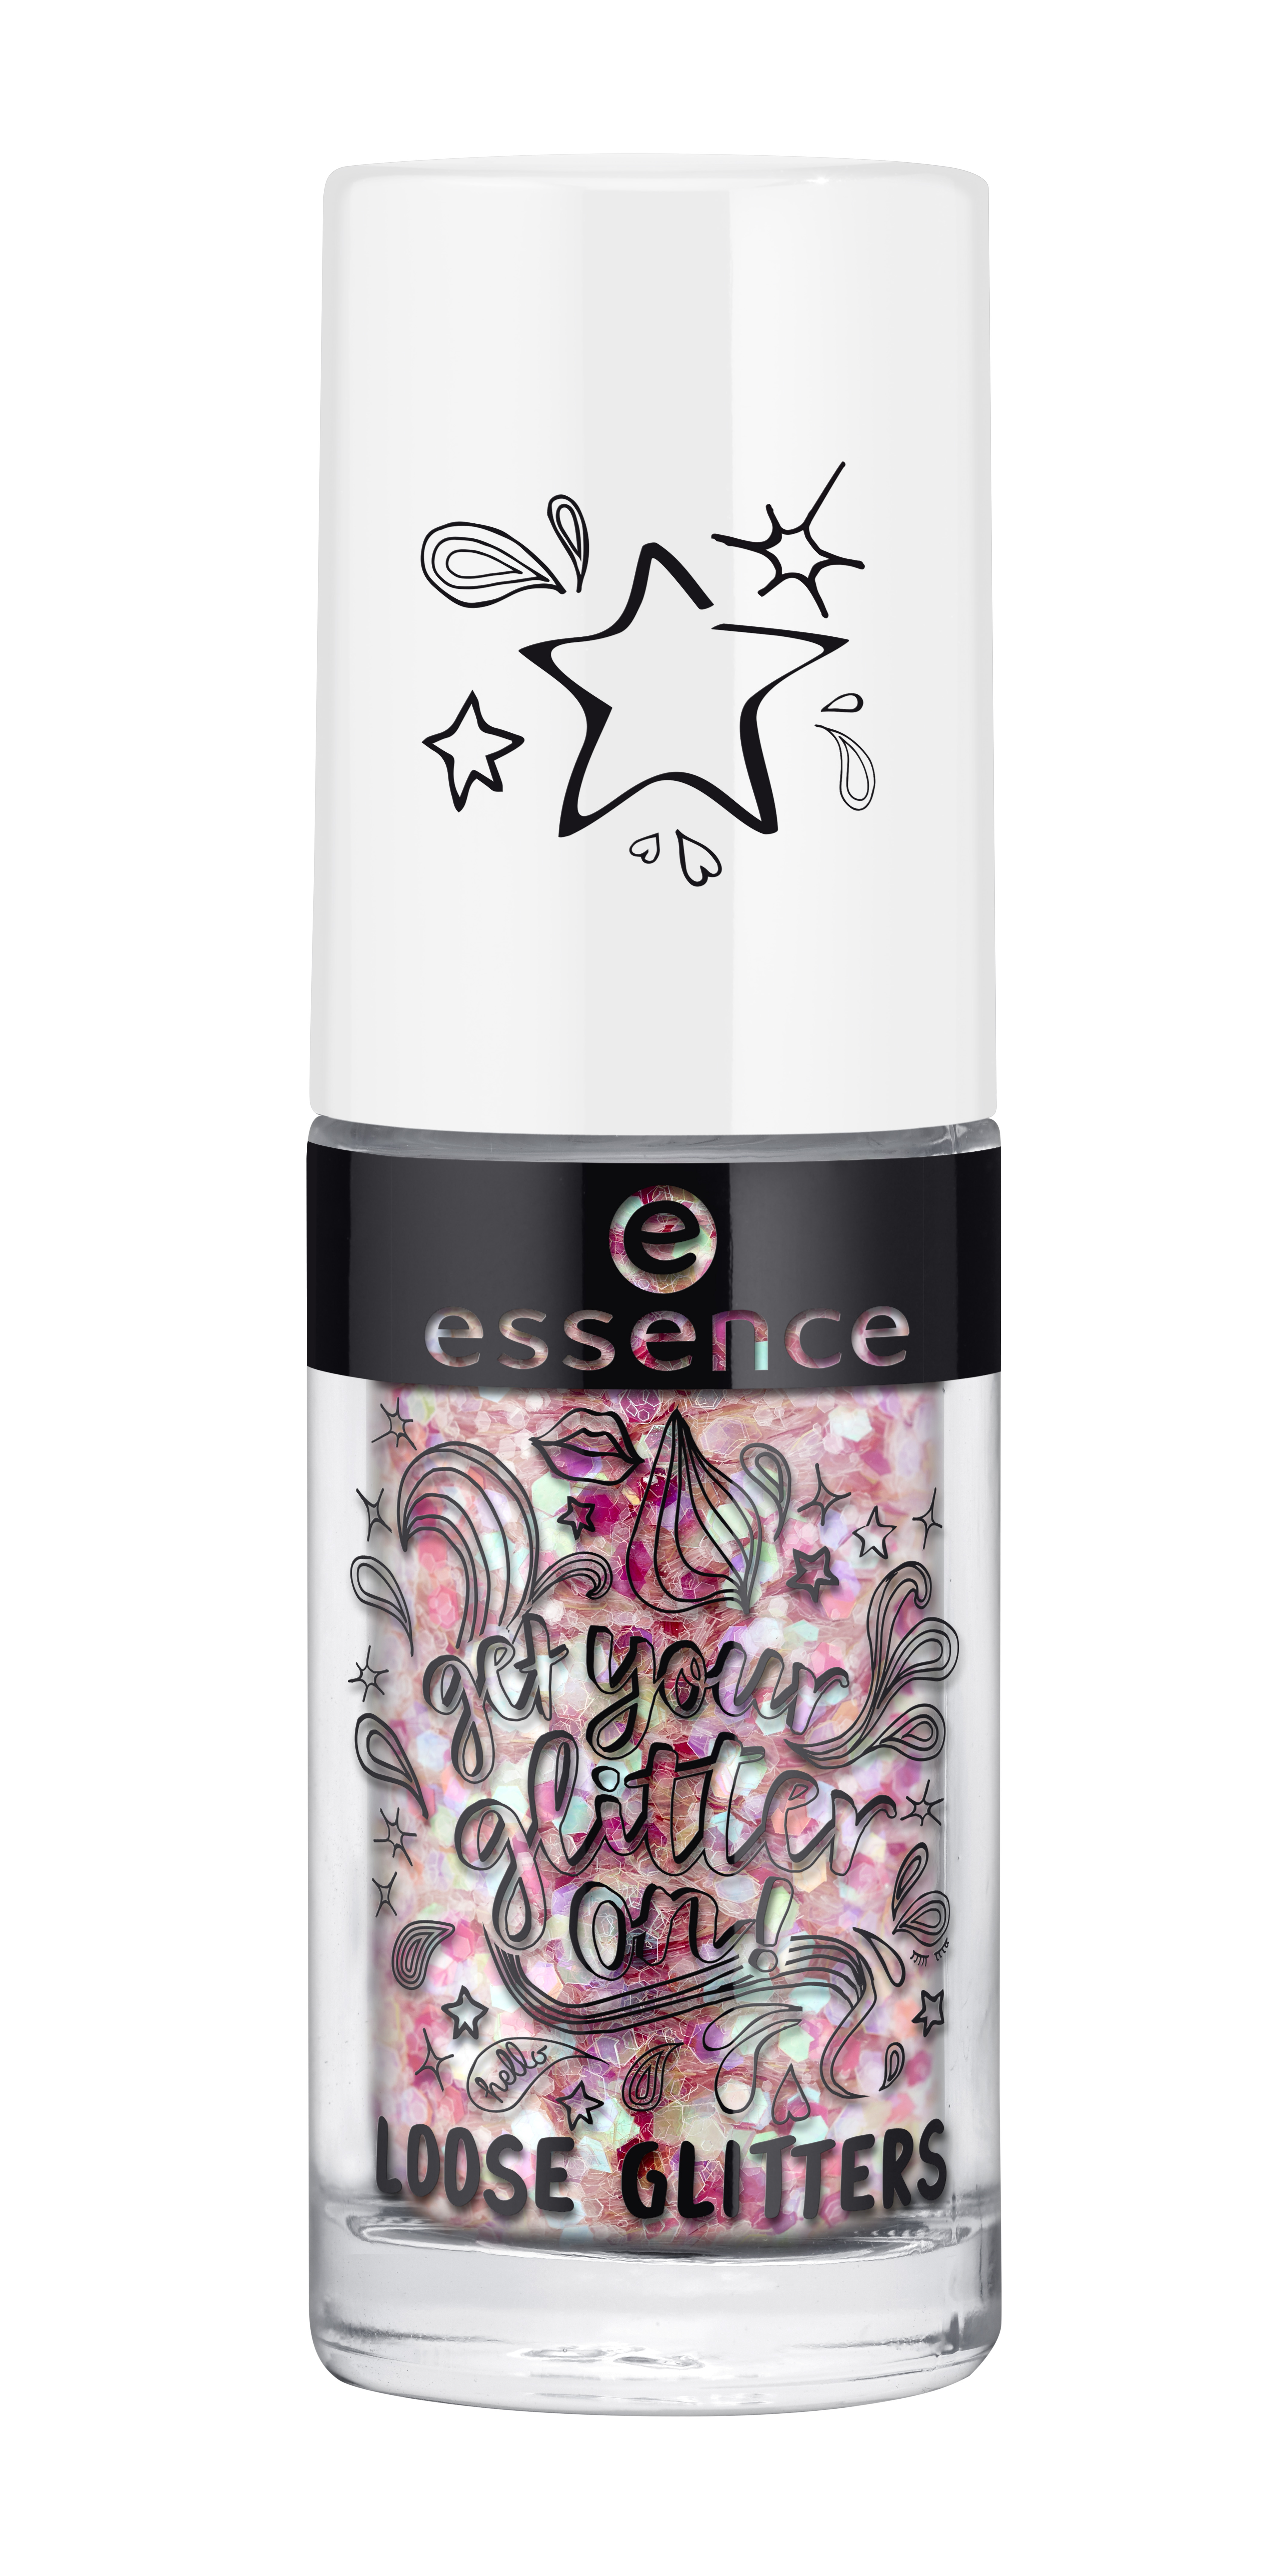 essence get your glitter on! loose glitters 03